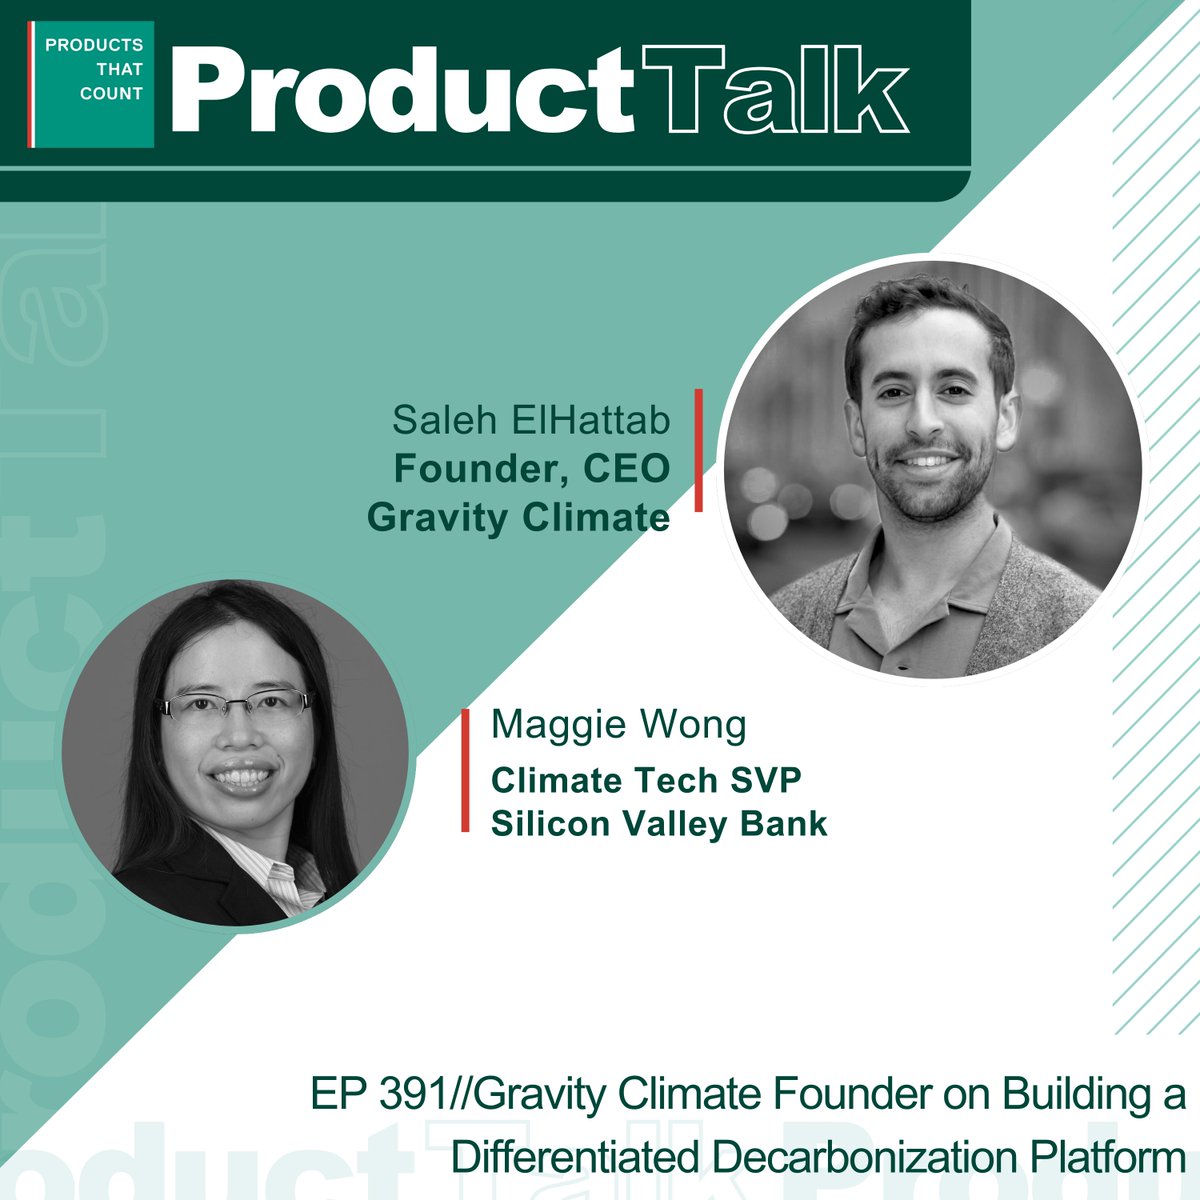 In the latest episode with host and Silicon Valley Bank Climate Tech & Sustainability SVP Maggie Wong interviews Gravity Climate Founder & CEO Saleh ElHattab to discuss building a differentiated decarbonization platform. Tune in here: productsthatcount.com/gravity-climat…